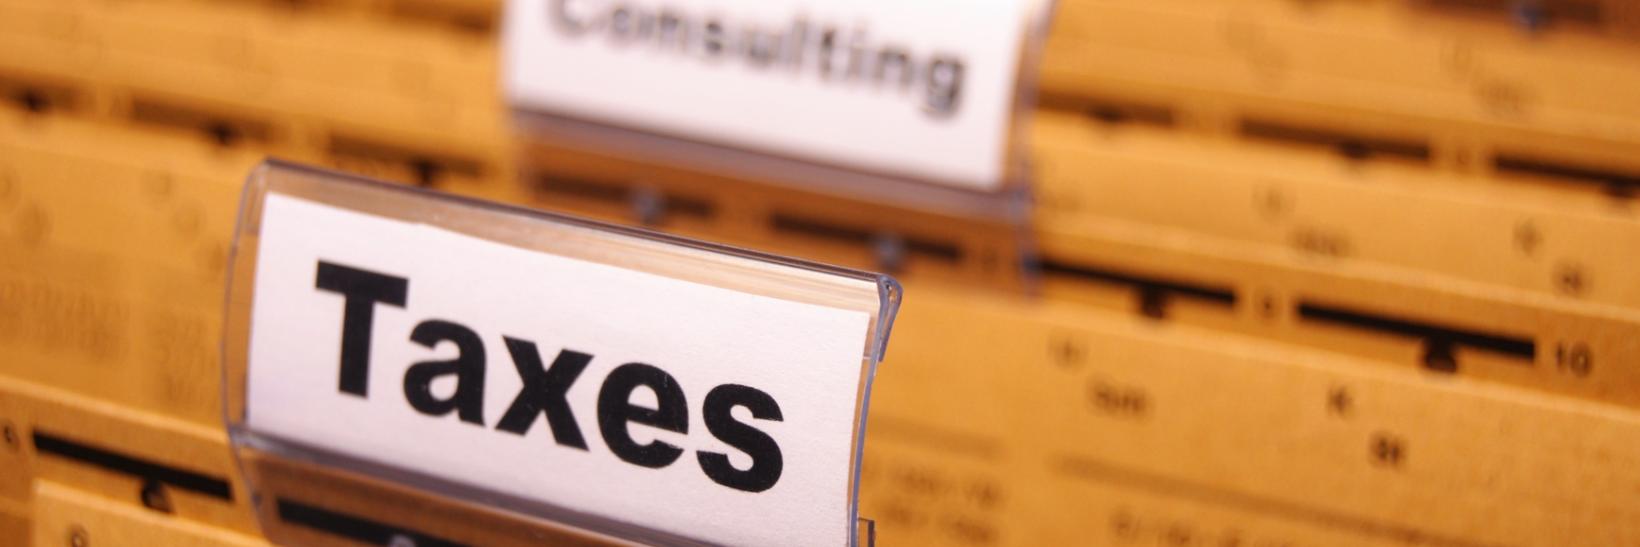 Learn if you need to pay your taxes by the April 15 filing deadline.